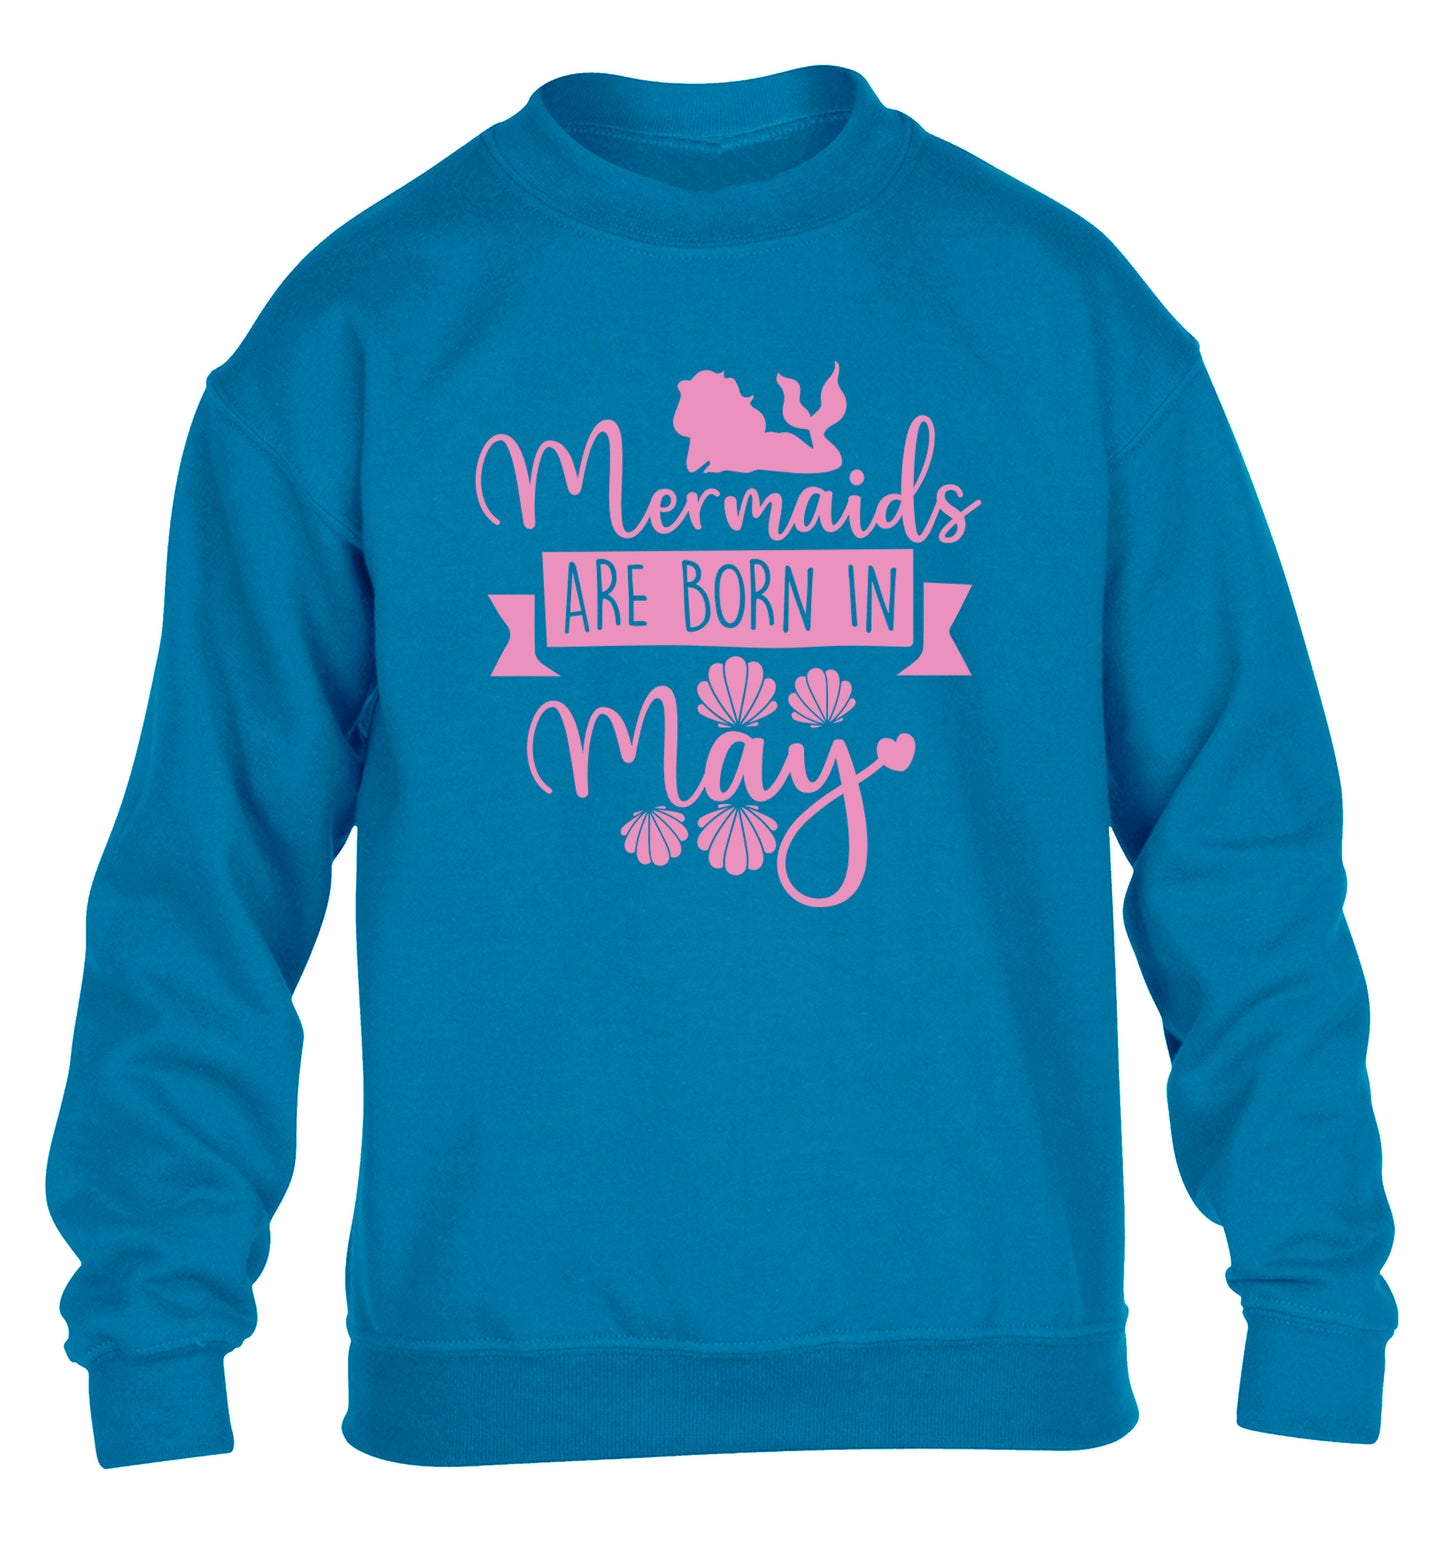 Mermaids are born in May children's blue sweater 12-13 Years